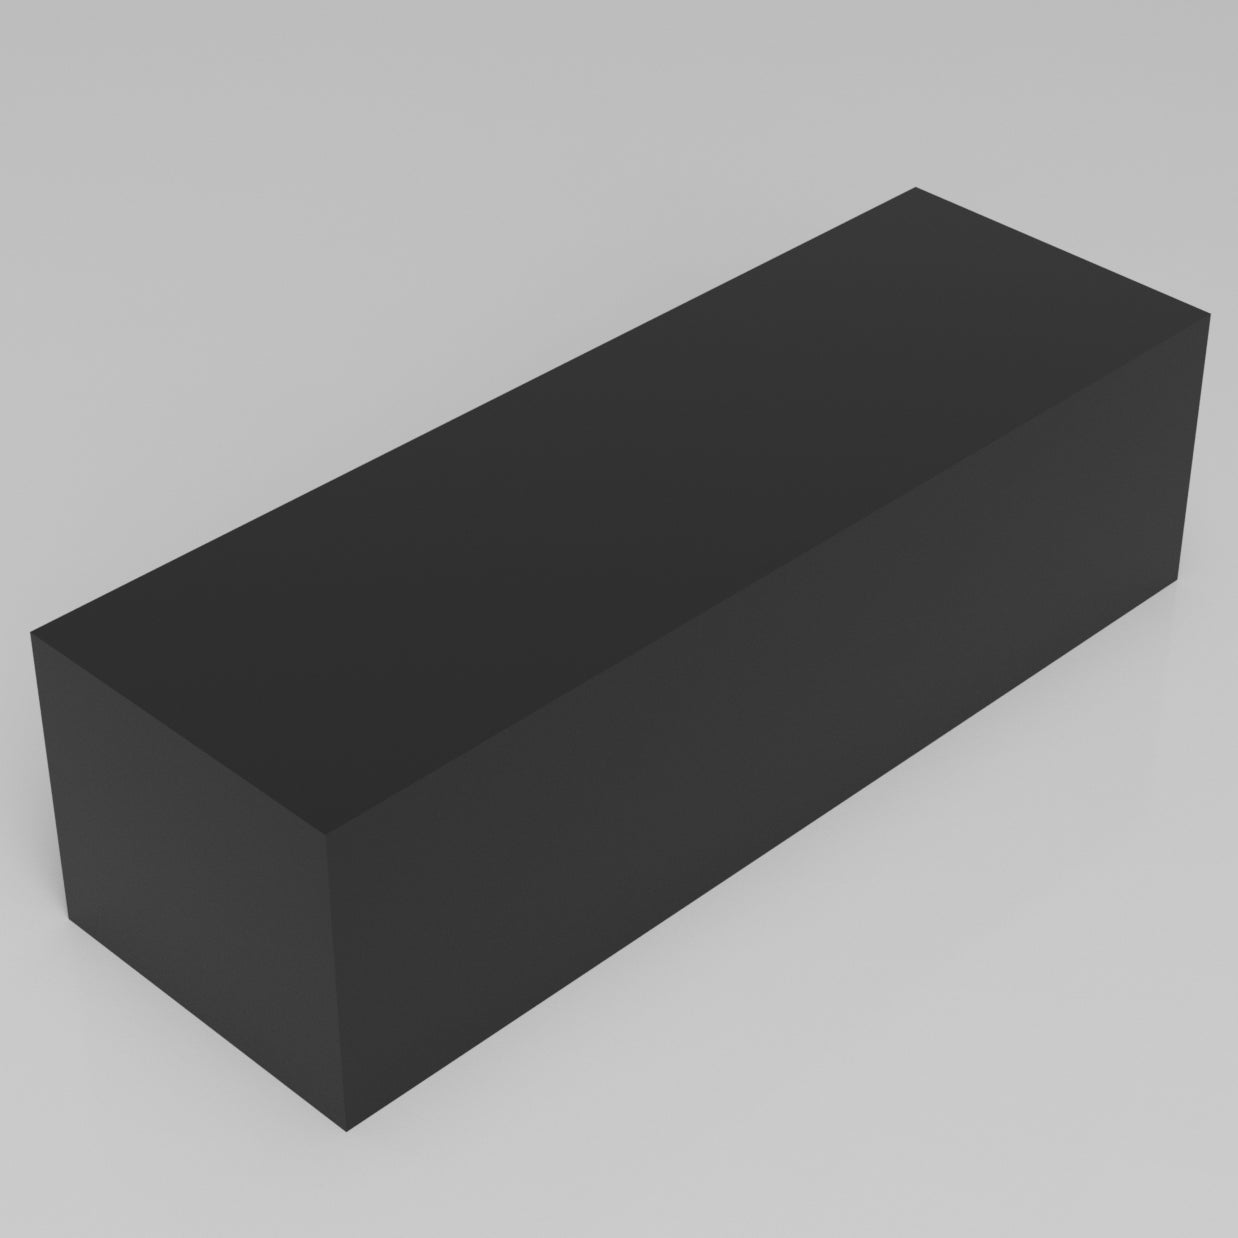 Machinable Wax Rectangular Block Front View 5 Inch by 6 Inch by 18 Inch